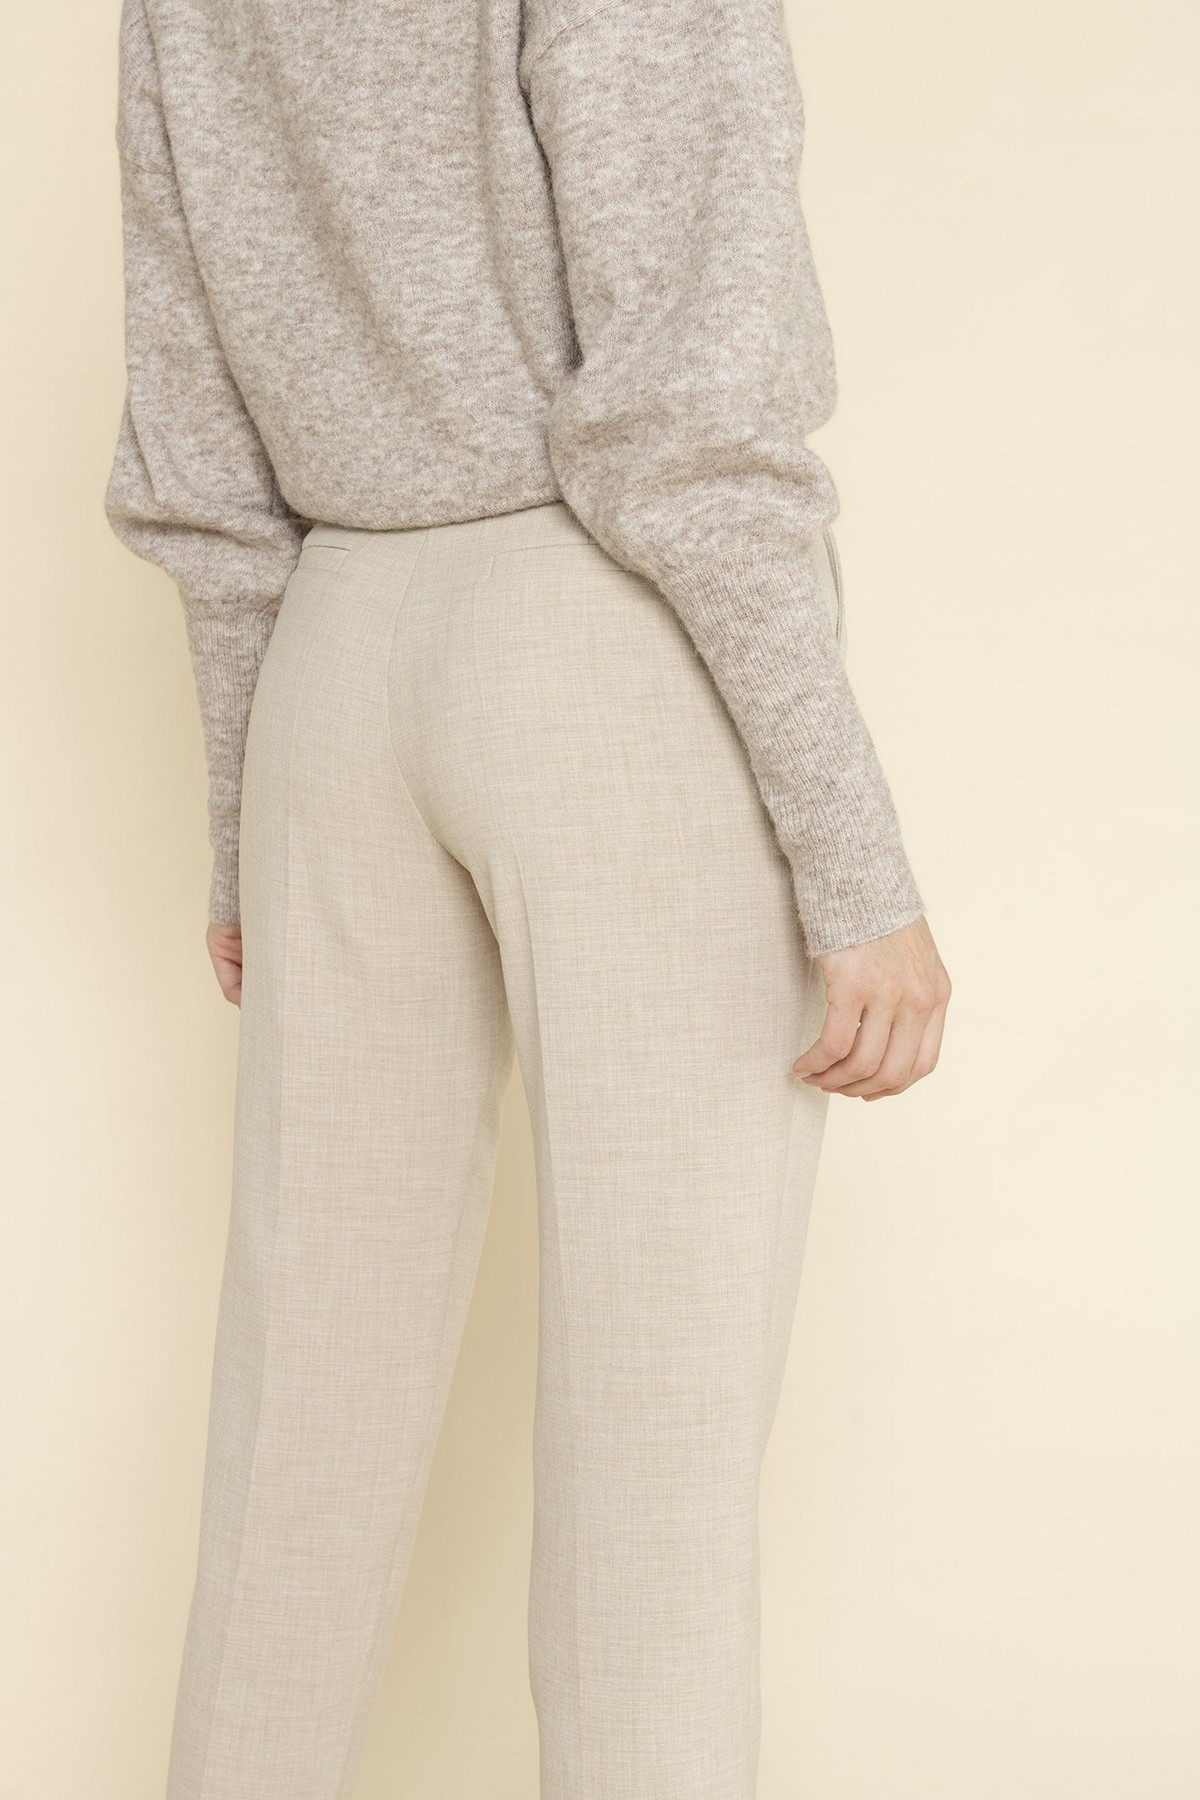 Oscar the collection - Bilbao trousers - Broek smal beige